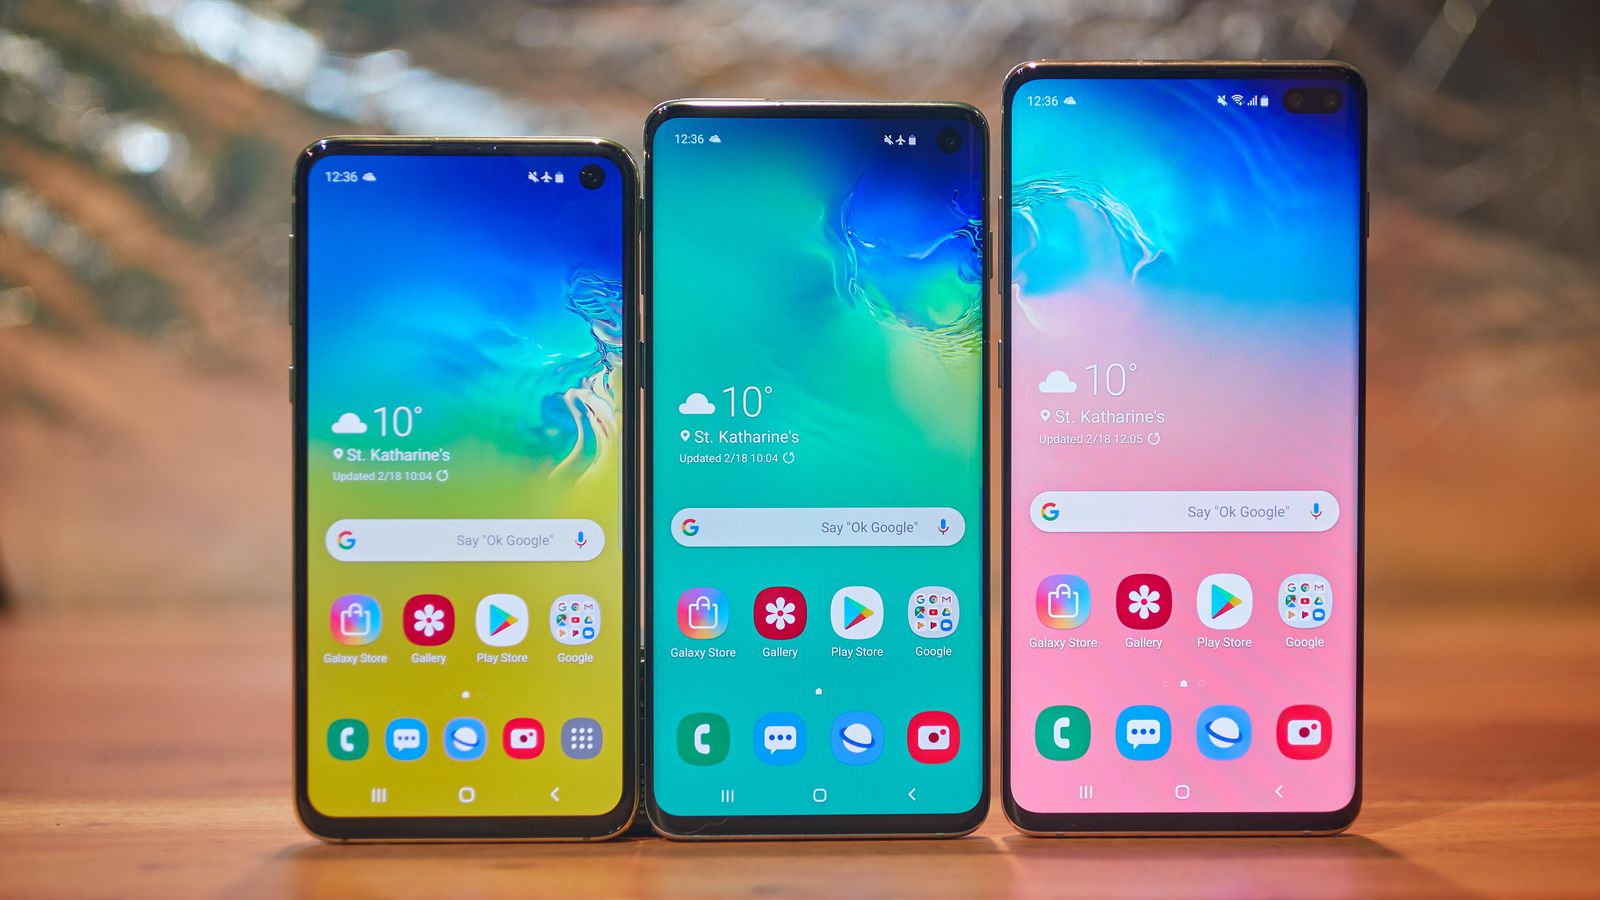 Samsung Galaxy S10 buy guide, best deals and discounts right now